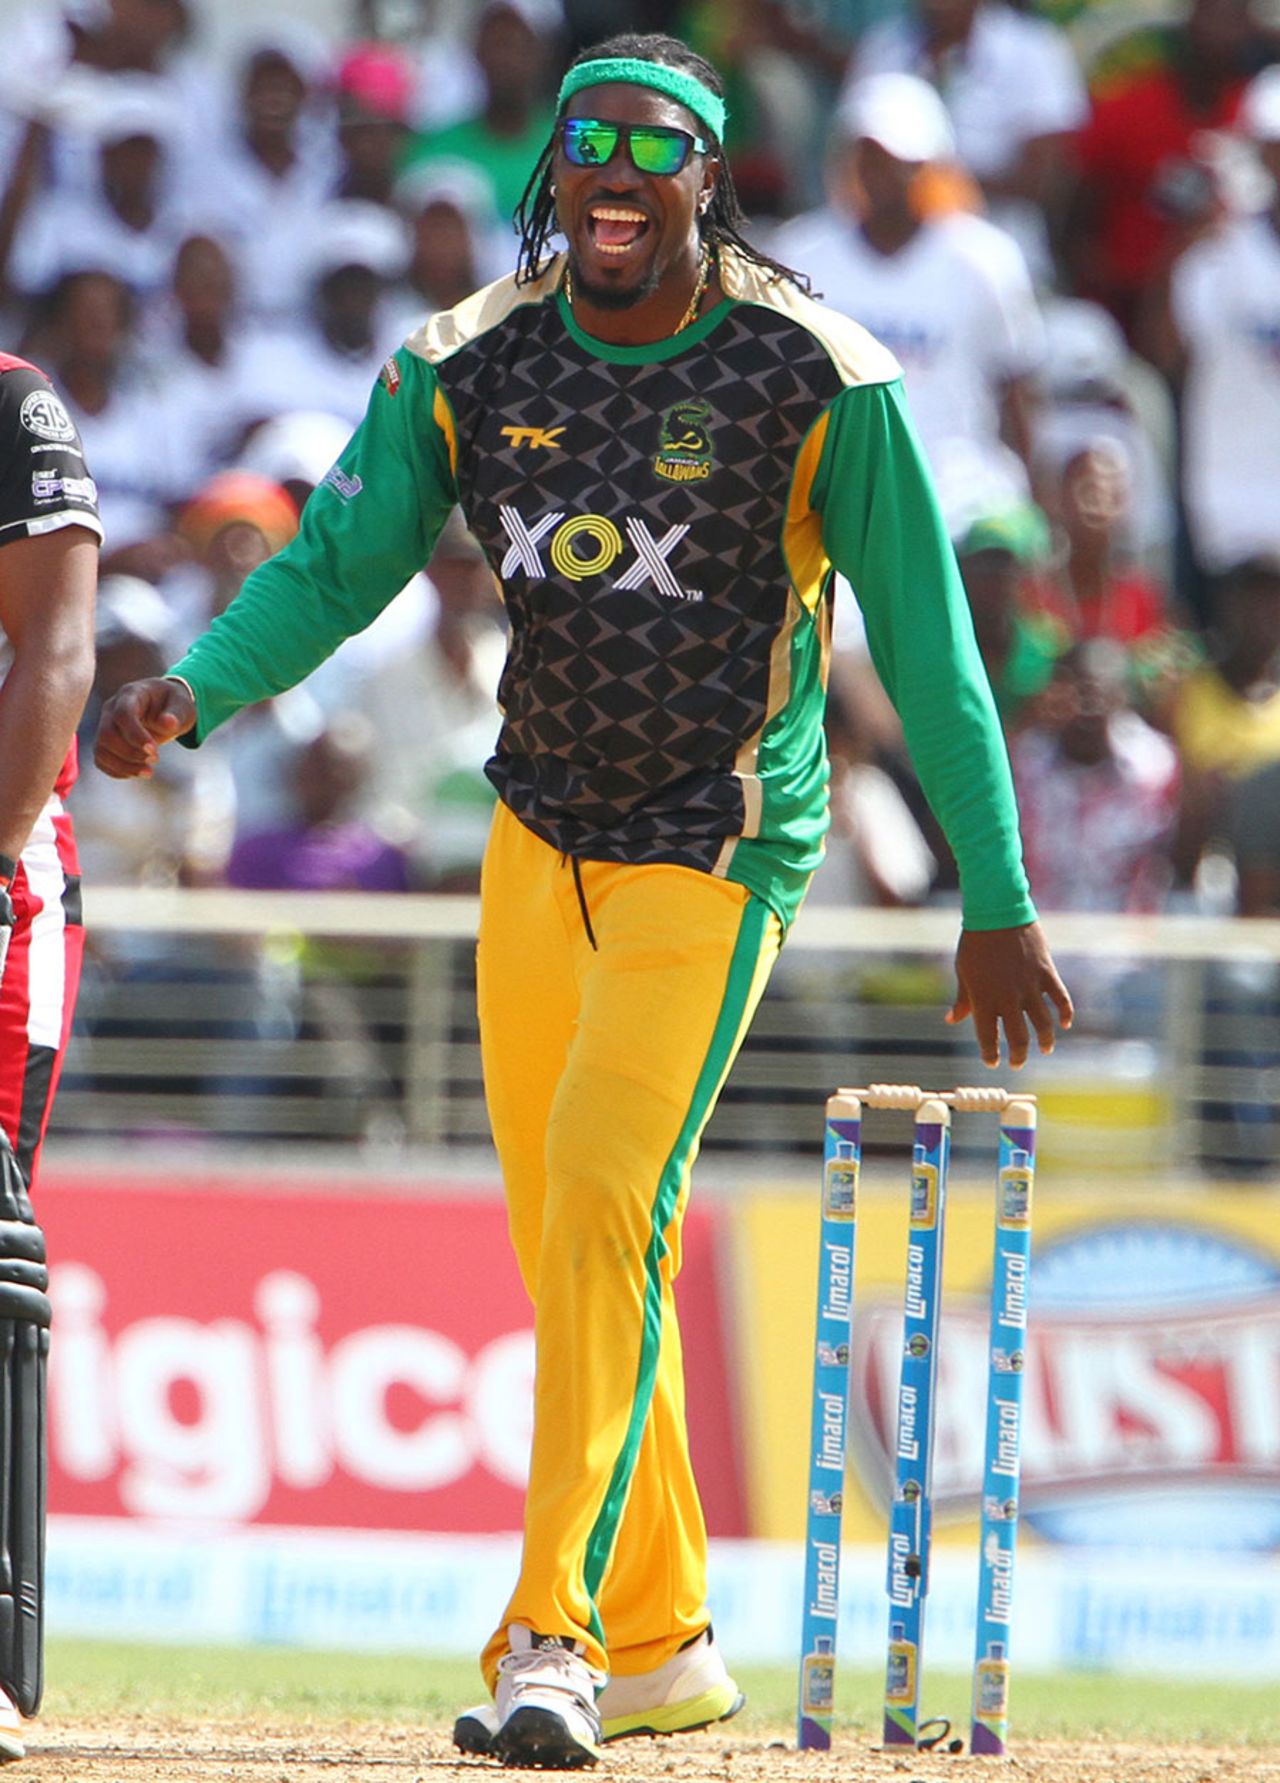 Chris Gayle is ecstatic after picking up a wicket, Jamaica Tallawahs v Trinidad & Tobago Red Steel, Caribbean Premier League 2013, Kingston, August 18, 2013